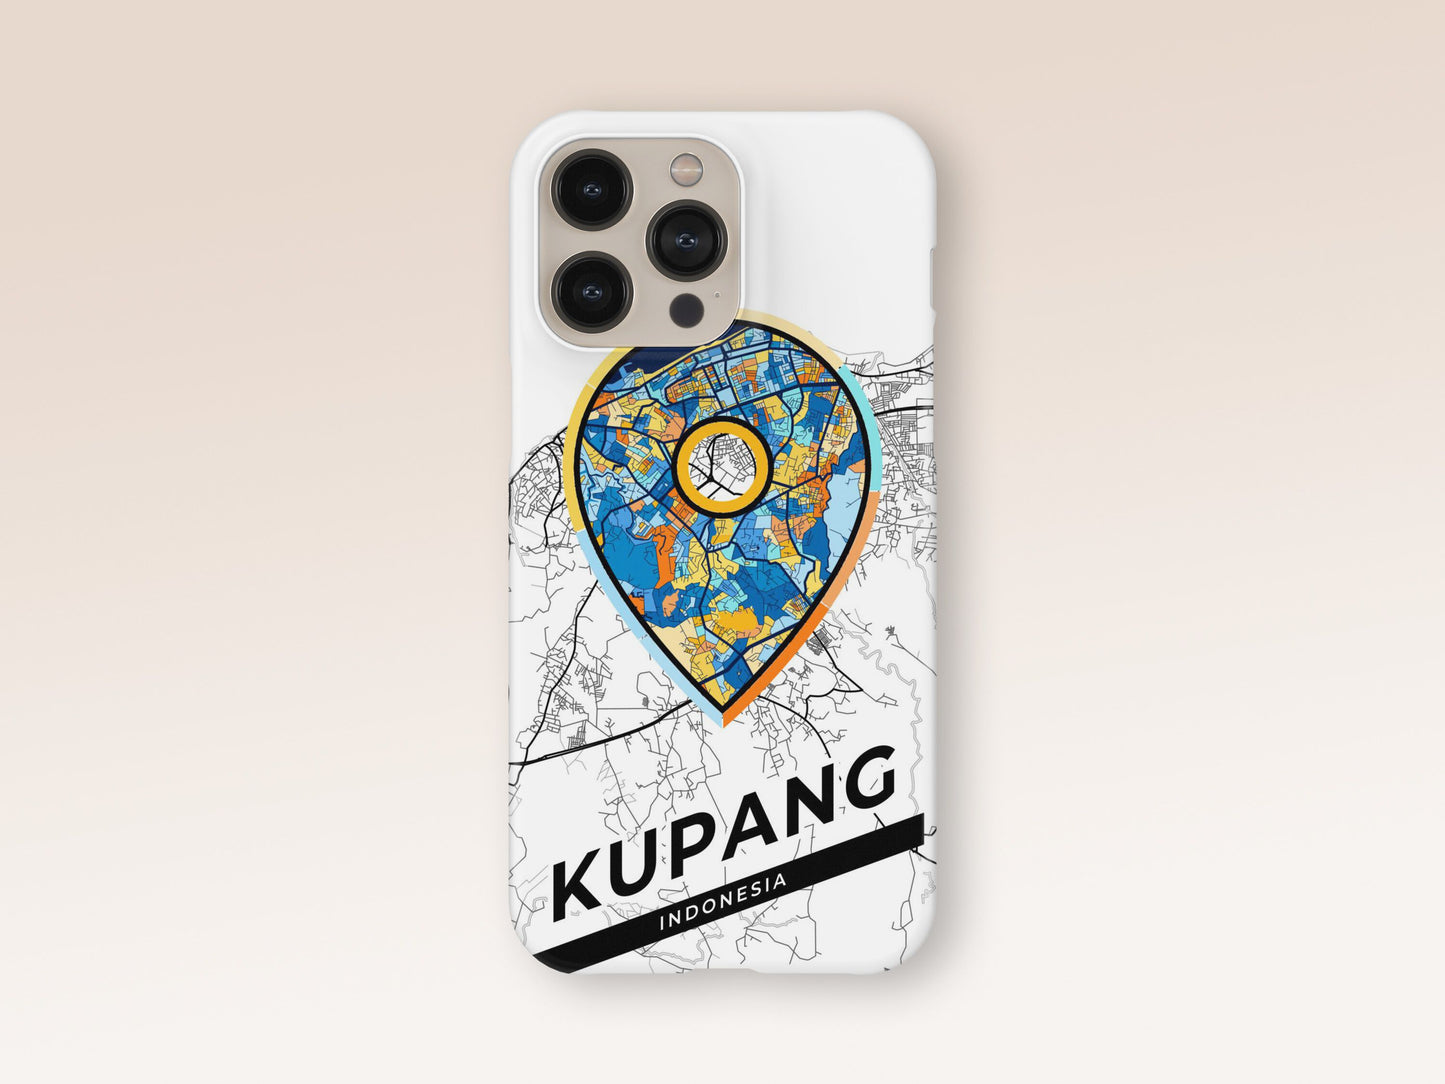 Kupang Indonesia slim phone case with colorful icon. Birthday, wedding or housewarming gift. Couple match cases. 1